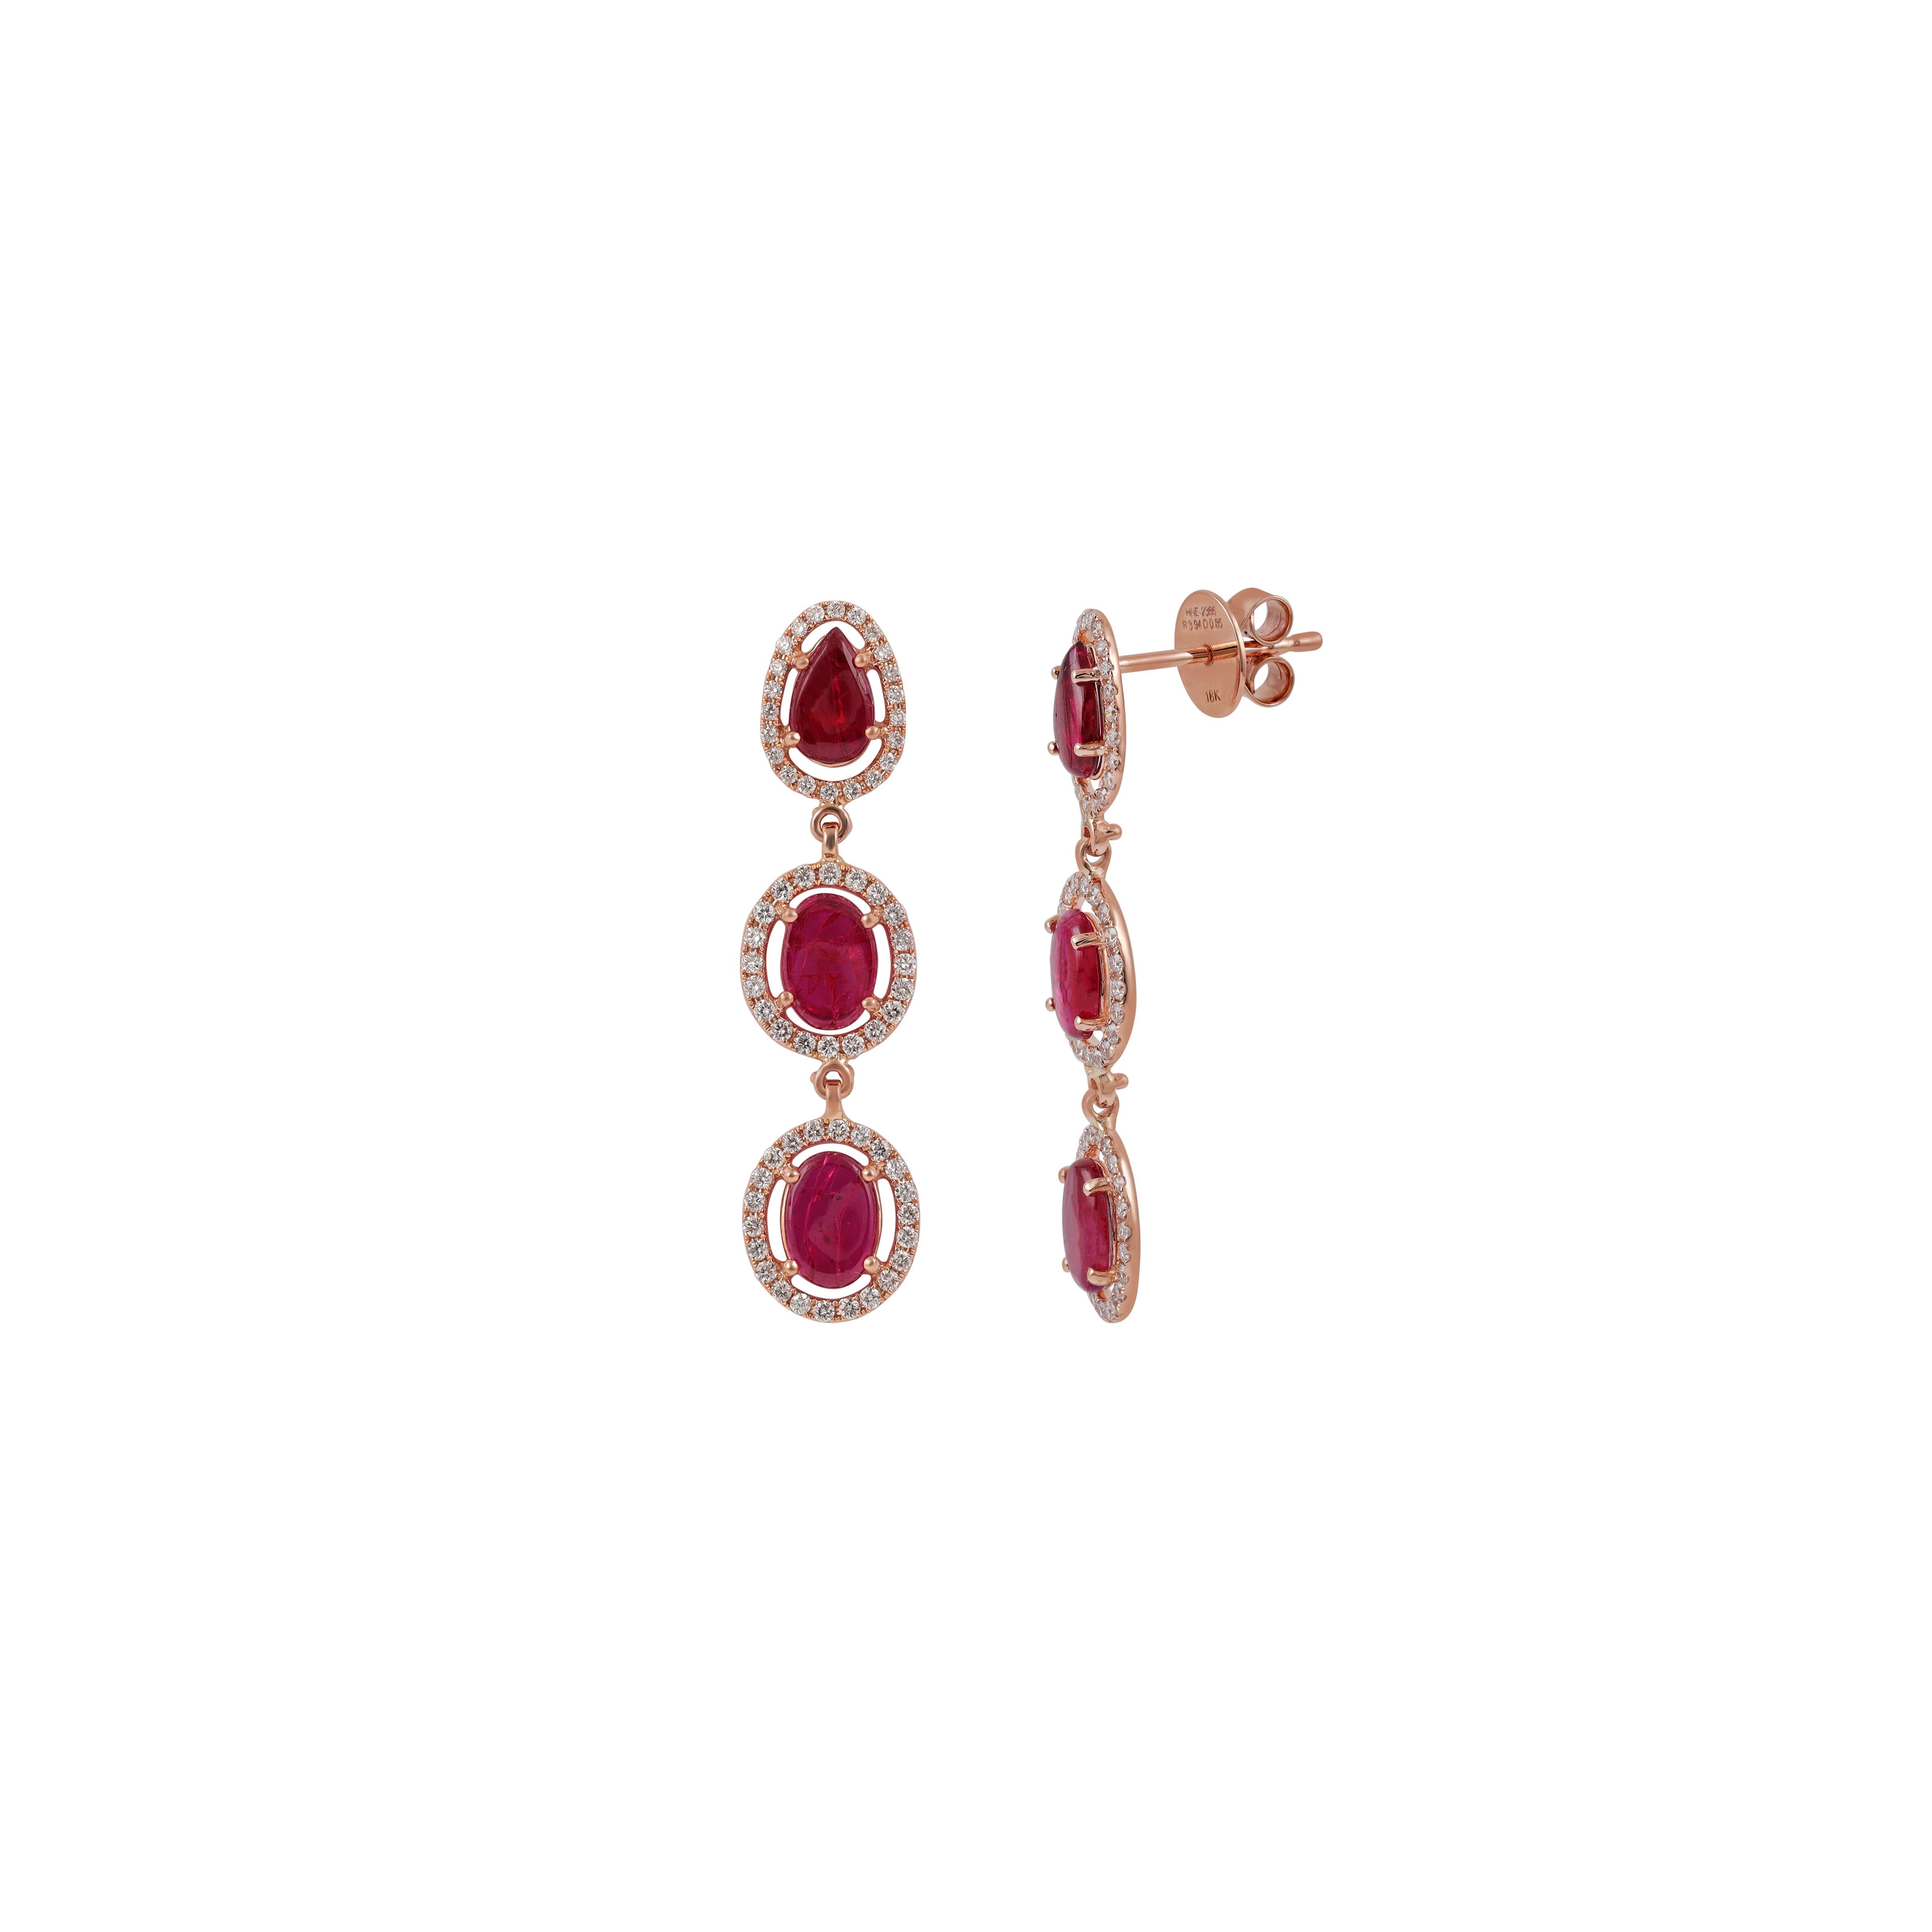 These are an exclusive earrings with ruby & diamonds features 6 pieces of rubies weight 3.94 carats, surrounded with 128 pieces of round brilliant cut of diamonds weight 0.85 carats, These entire earrings are studded in 18k rose gold weight 4.62